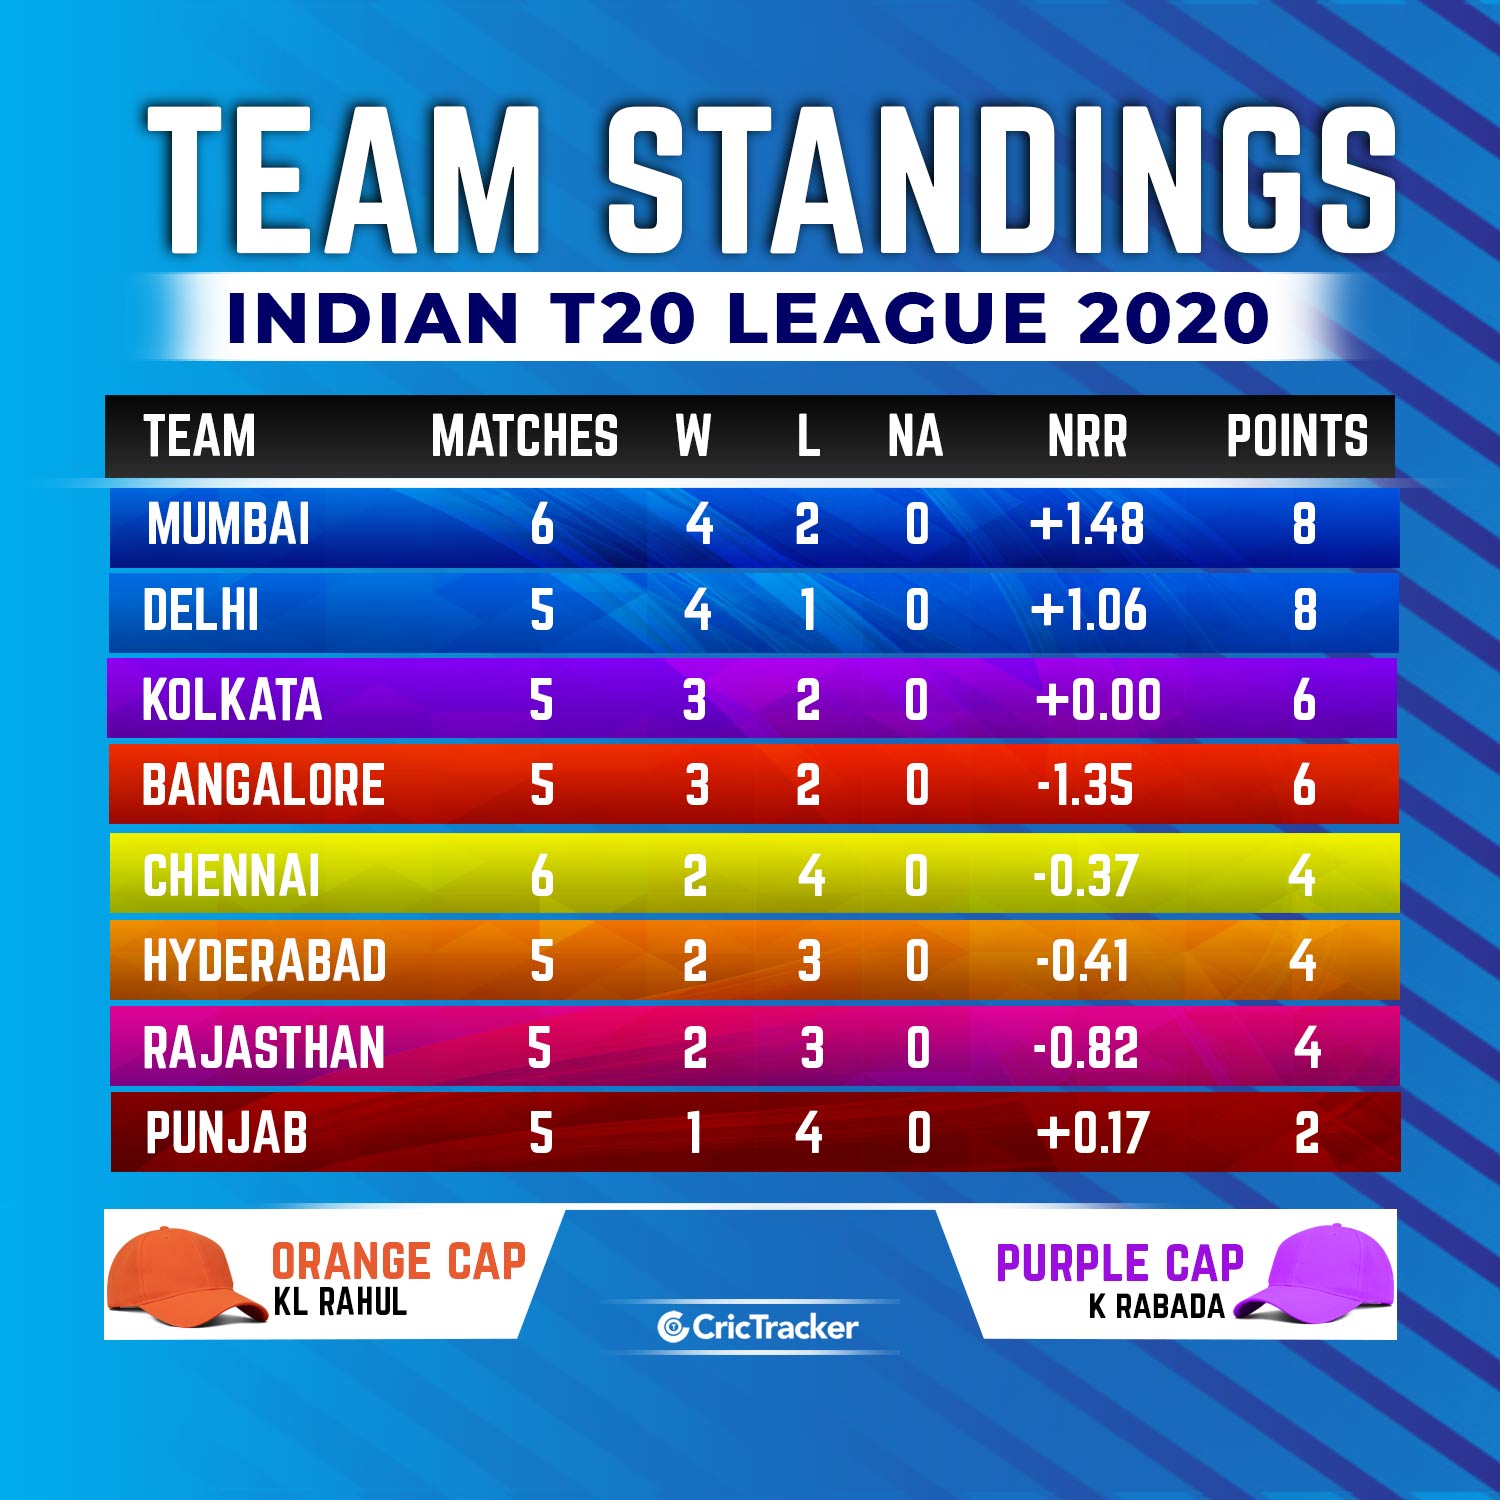 Here’s the IPL 2020 points table in detail.